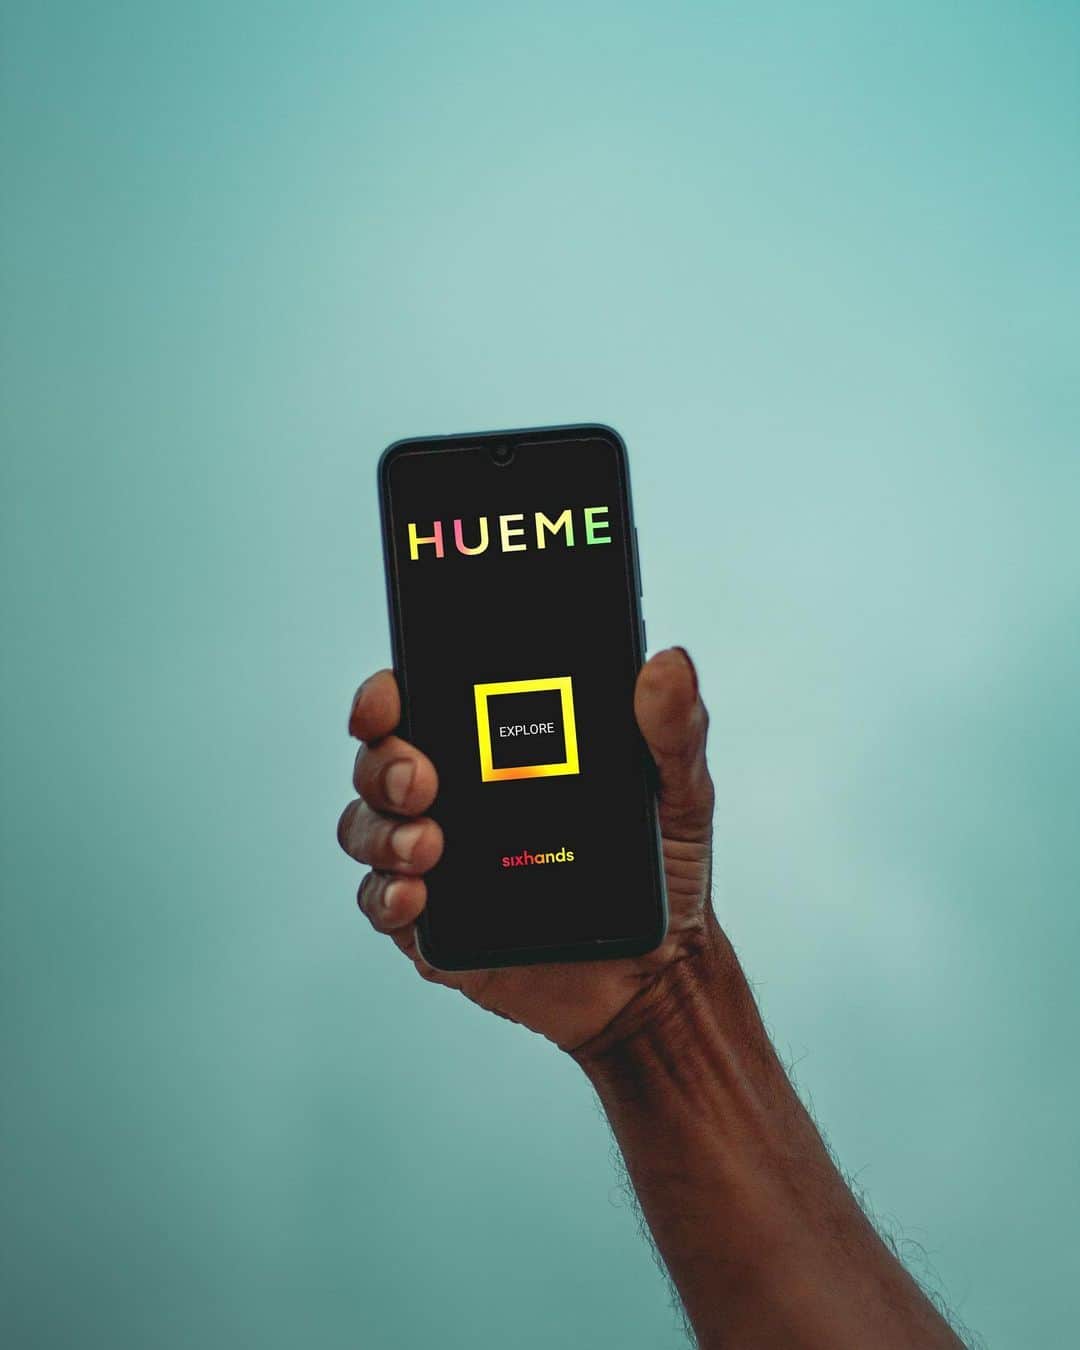 Shapicalのインスタグラム：「Today is smth really different! We want to tell you the story of Hueme. ⠀ Once while coding another Shapical update, one of our devs played a puzzle game on the phone taking a rest and another UI-designer stayed near and asked out loud: — "Why don't we do the same?". — "What?" asked a dev. — "The same game but in our own style! With dynamic gradients from our photo editors". ⠀ And here the idea of Hueme came as story tells. ⠀ The naming was easy — "Hue me! Right now!". Okay! Another 2 months of projecting, 2 months for UI, 3 months for levels development, and here is the first release of a product! ⠀ The game exceeded our expectations, it turned out to be charming and immersive ..and we're still playing it nowadays. ⠀ Give a chance to Hueme! The game will stay for a certain time on your device :)  Link in the stories📲 ⠀ #gameplay #mobilegame #puzzle #puzzlegame #gradient #gradientgame #game #devstory #story #devapps #movee #appdev #mobiledev #gamedev #mobileart #photoart #photoediting #iphoneography #creative #artofvisuals #ig_artistry #design #neon #light」